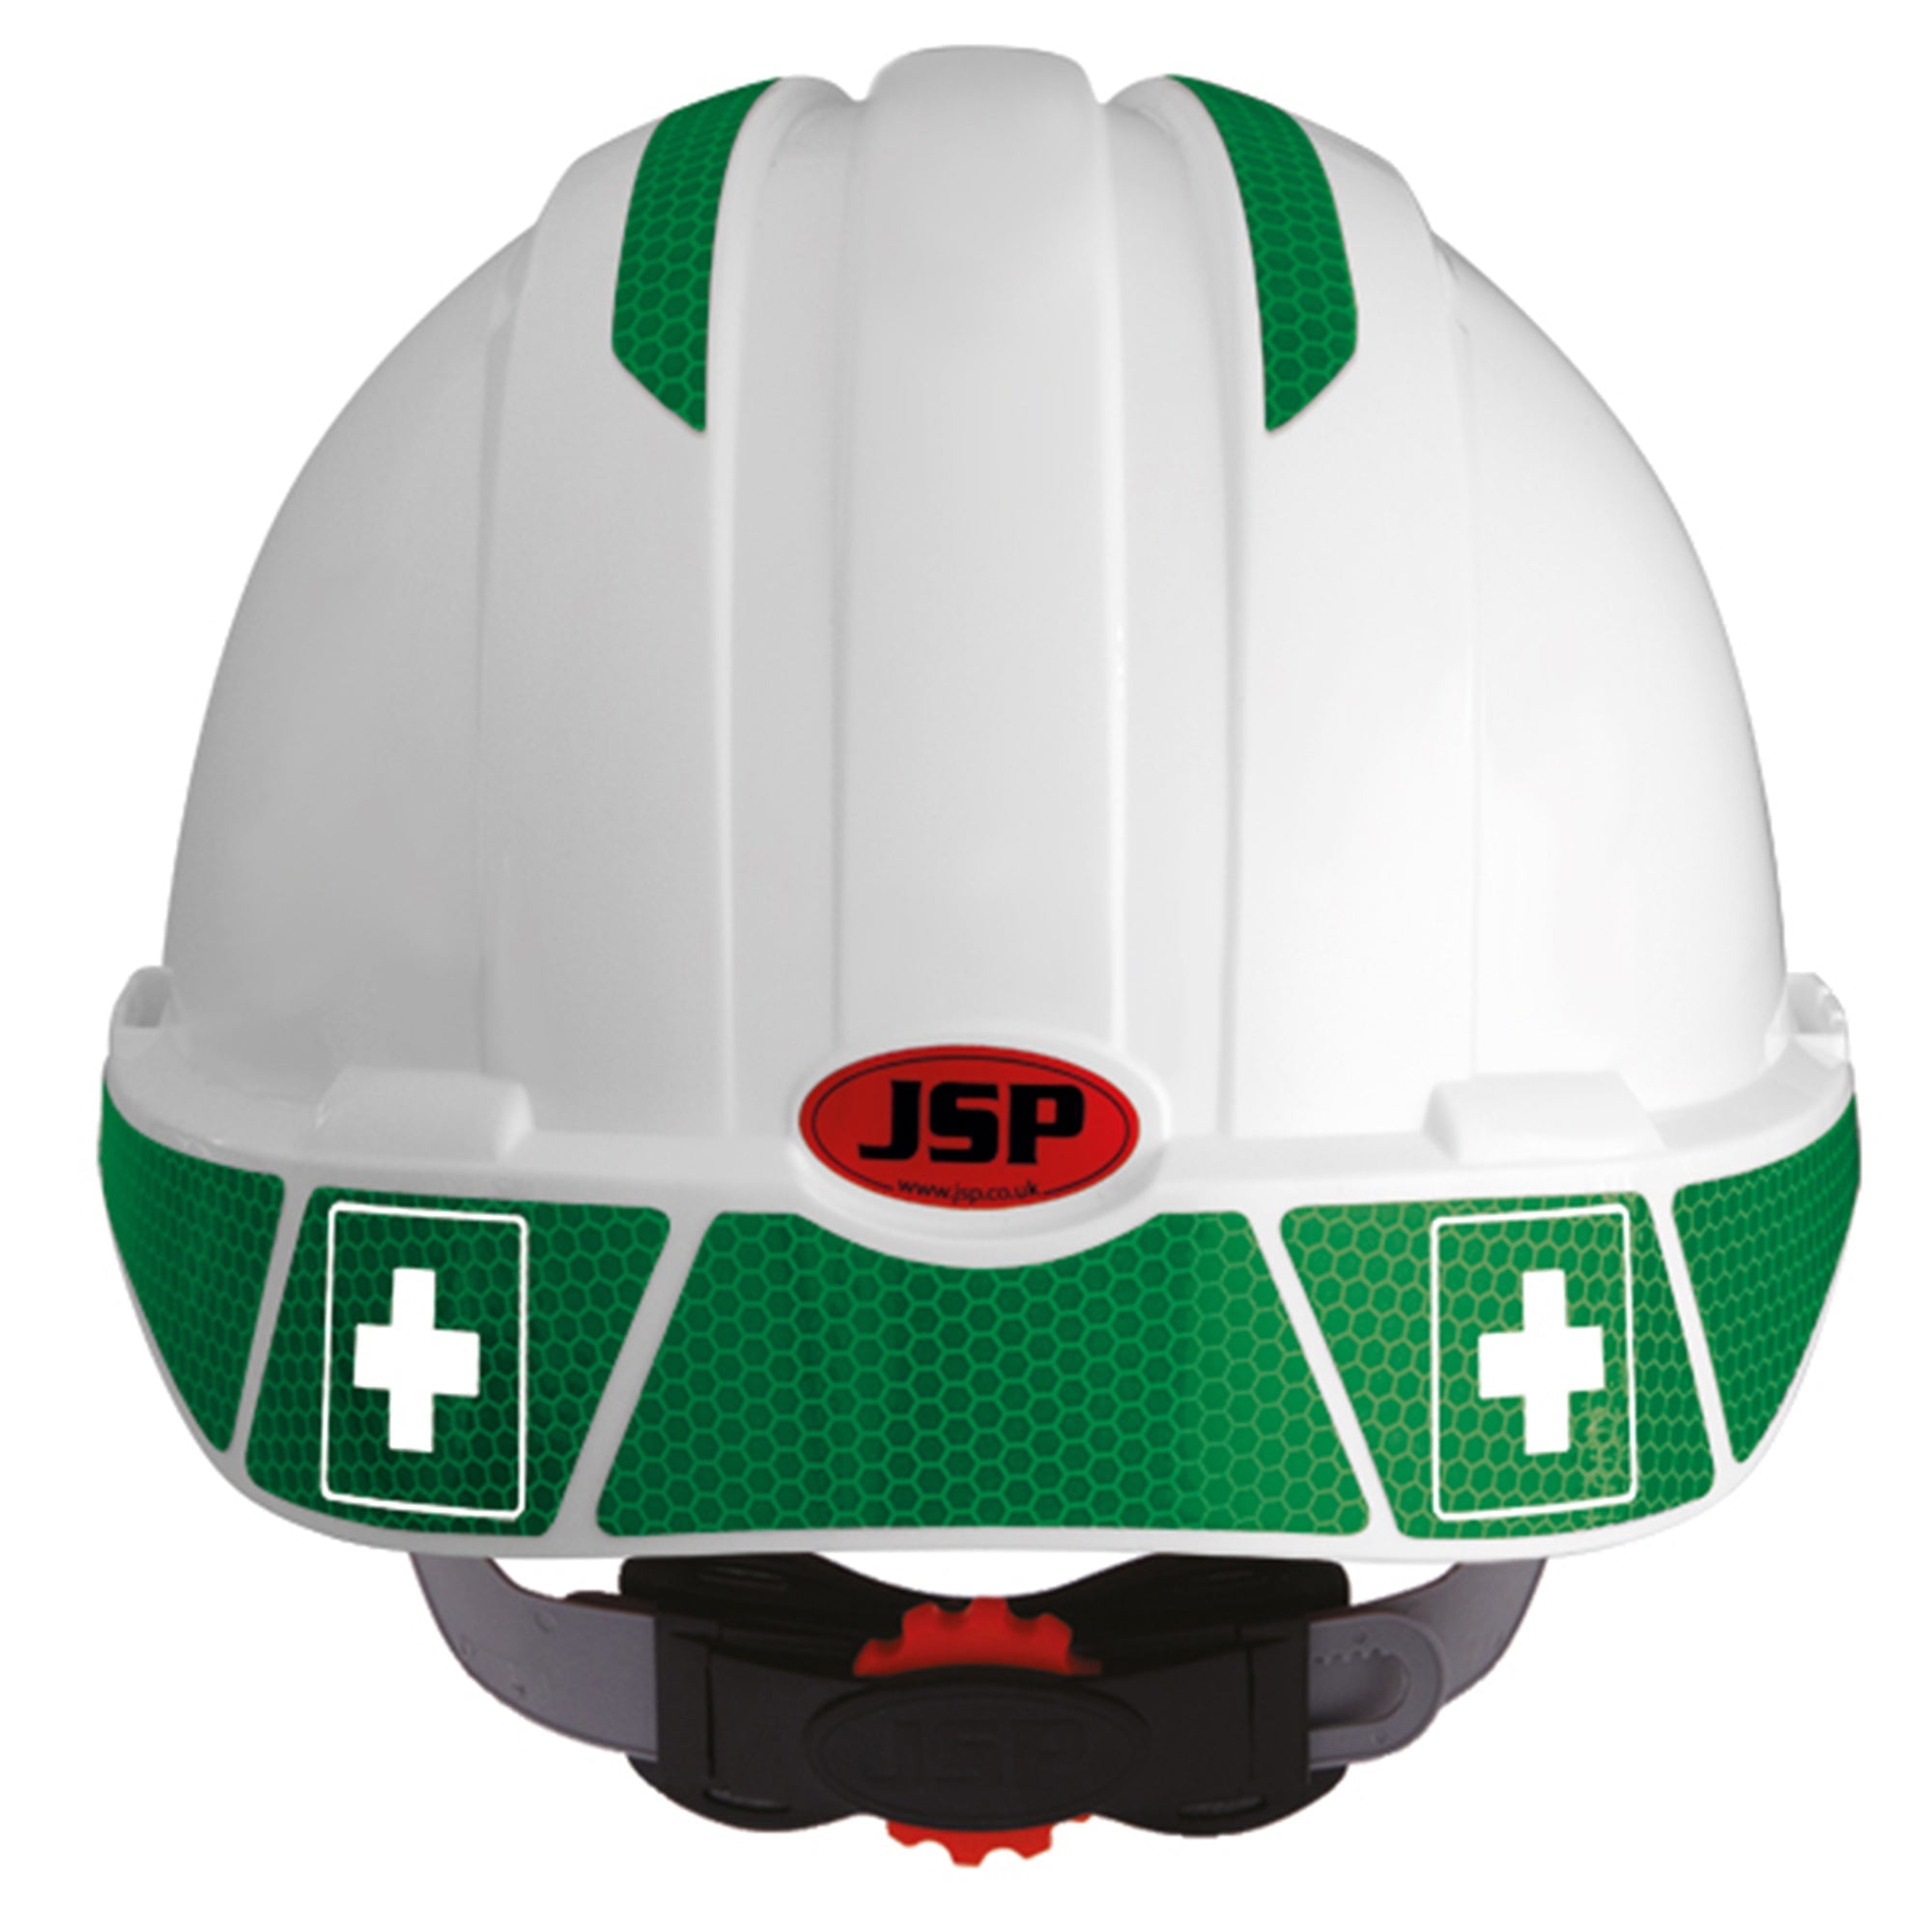 JSP Reflective CR2 Decal Kit for EVO®2/3 First Aid - Pack of 10 Green